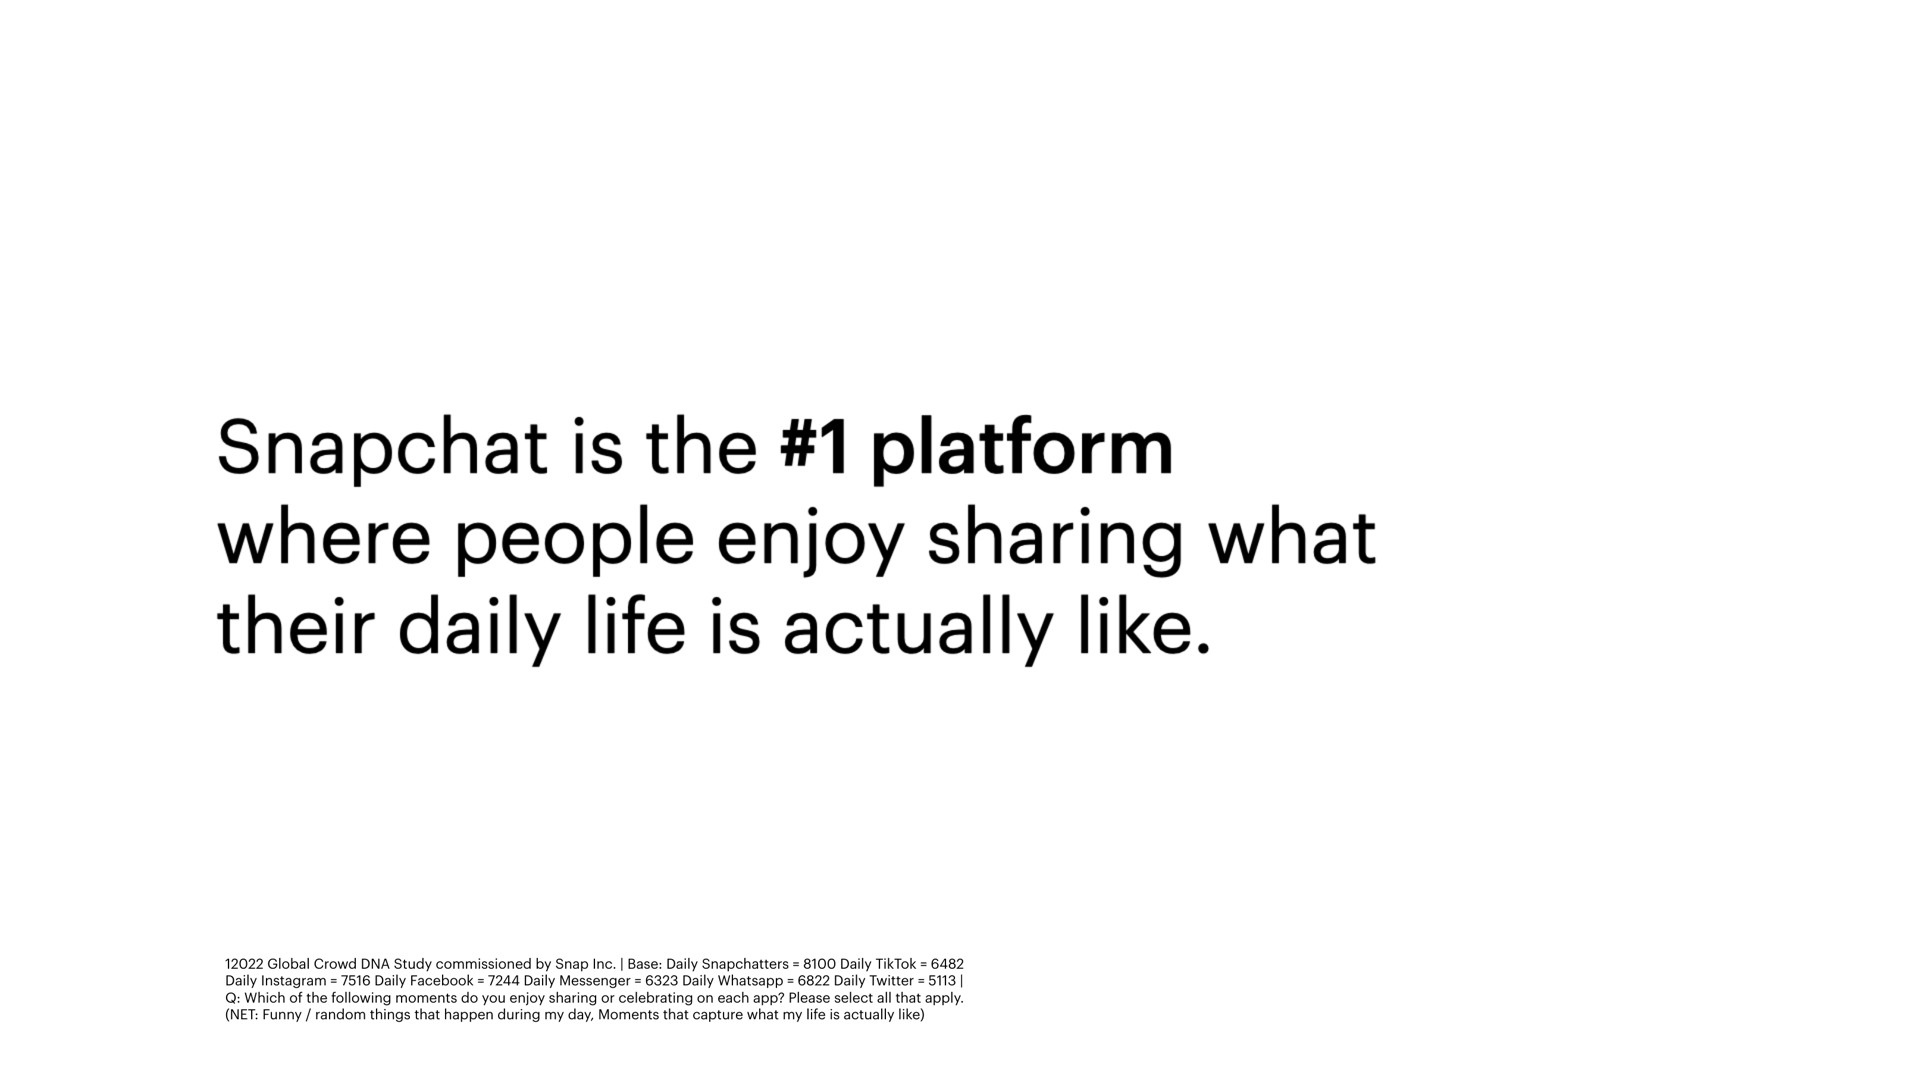 is the platform where people enjoy sharing what their daily life is actually like | Snap Inc